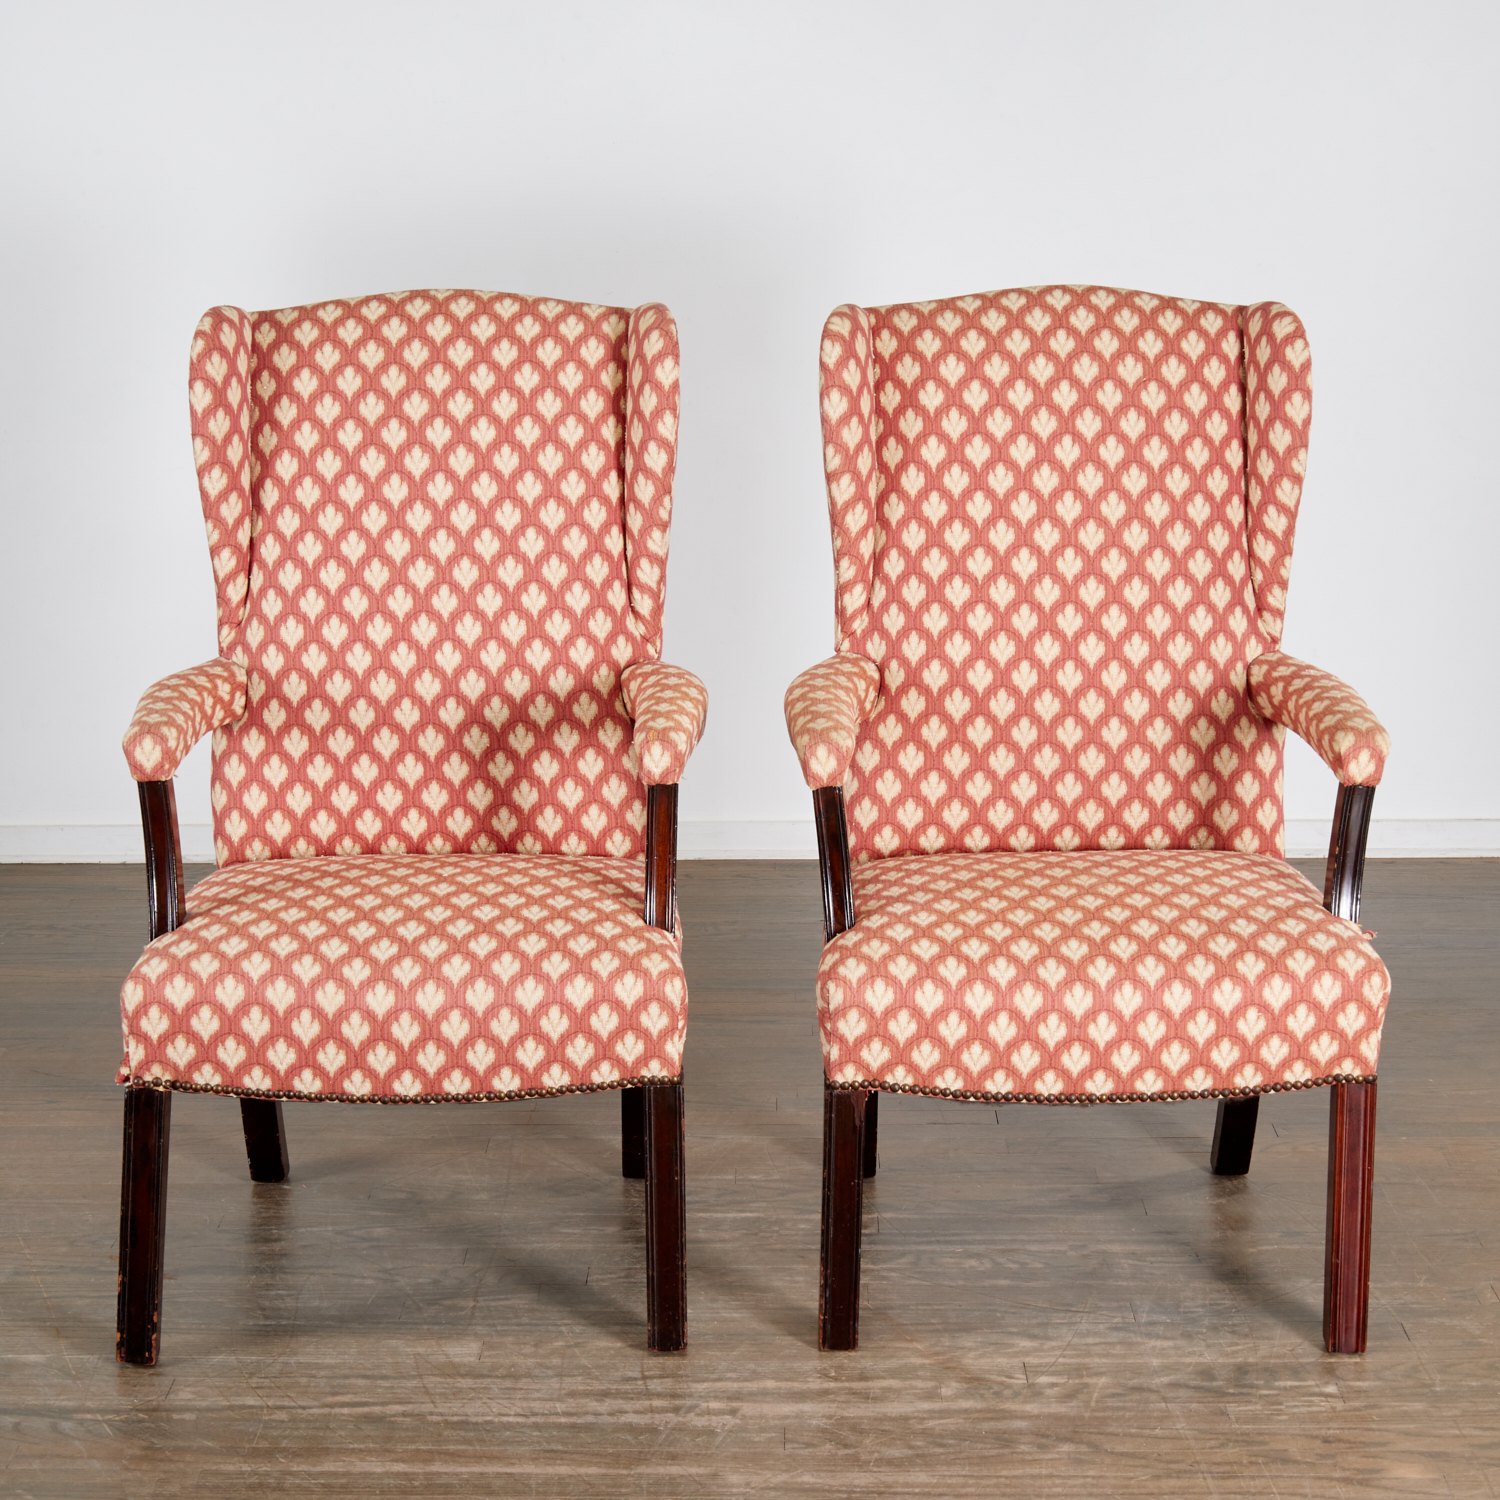 PAIR ANTIQUE WINGED LOLLING CHAIRS  361b54